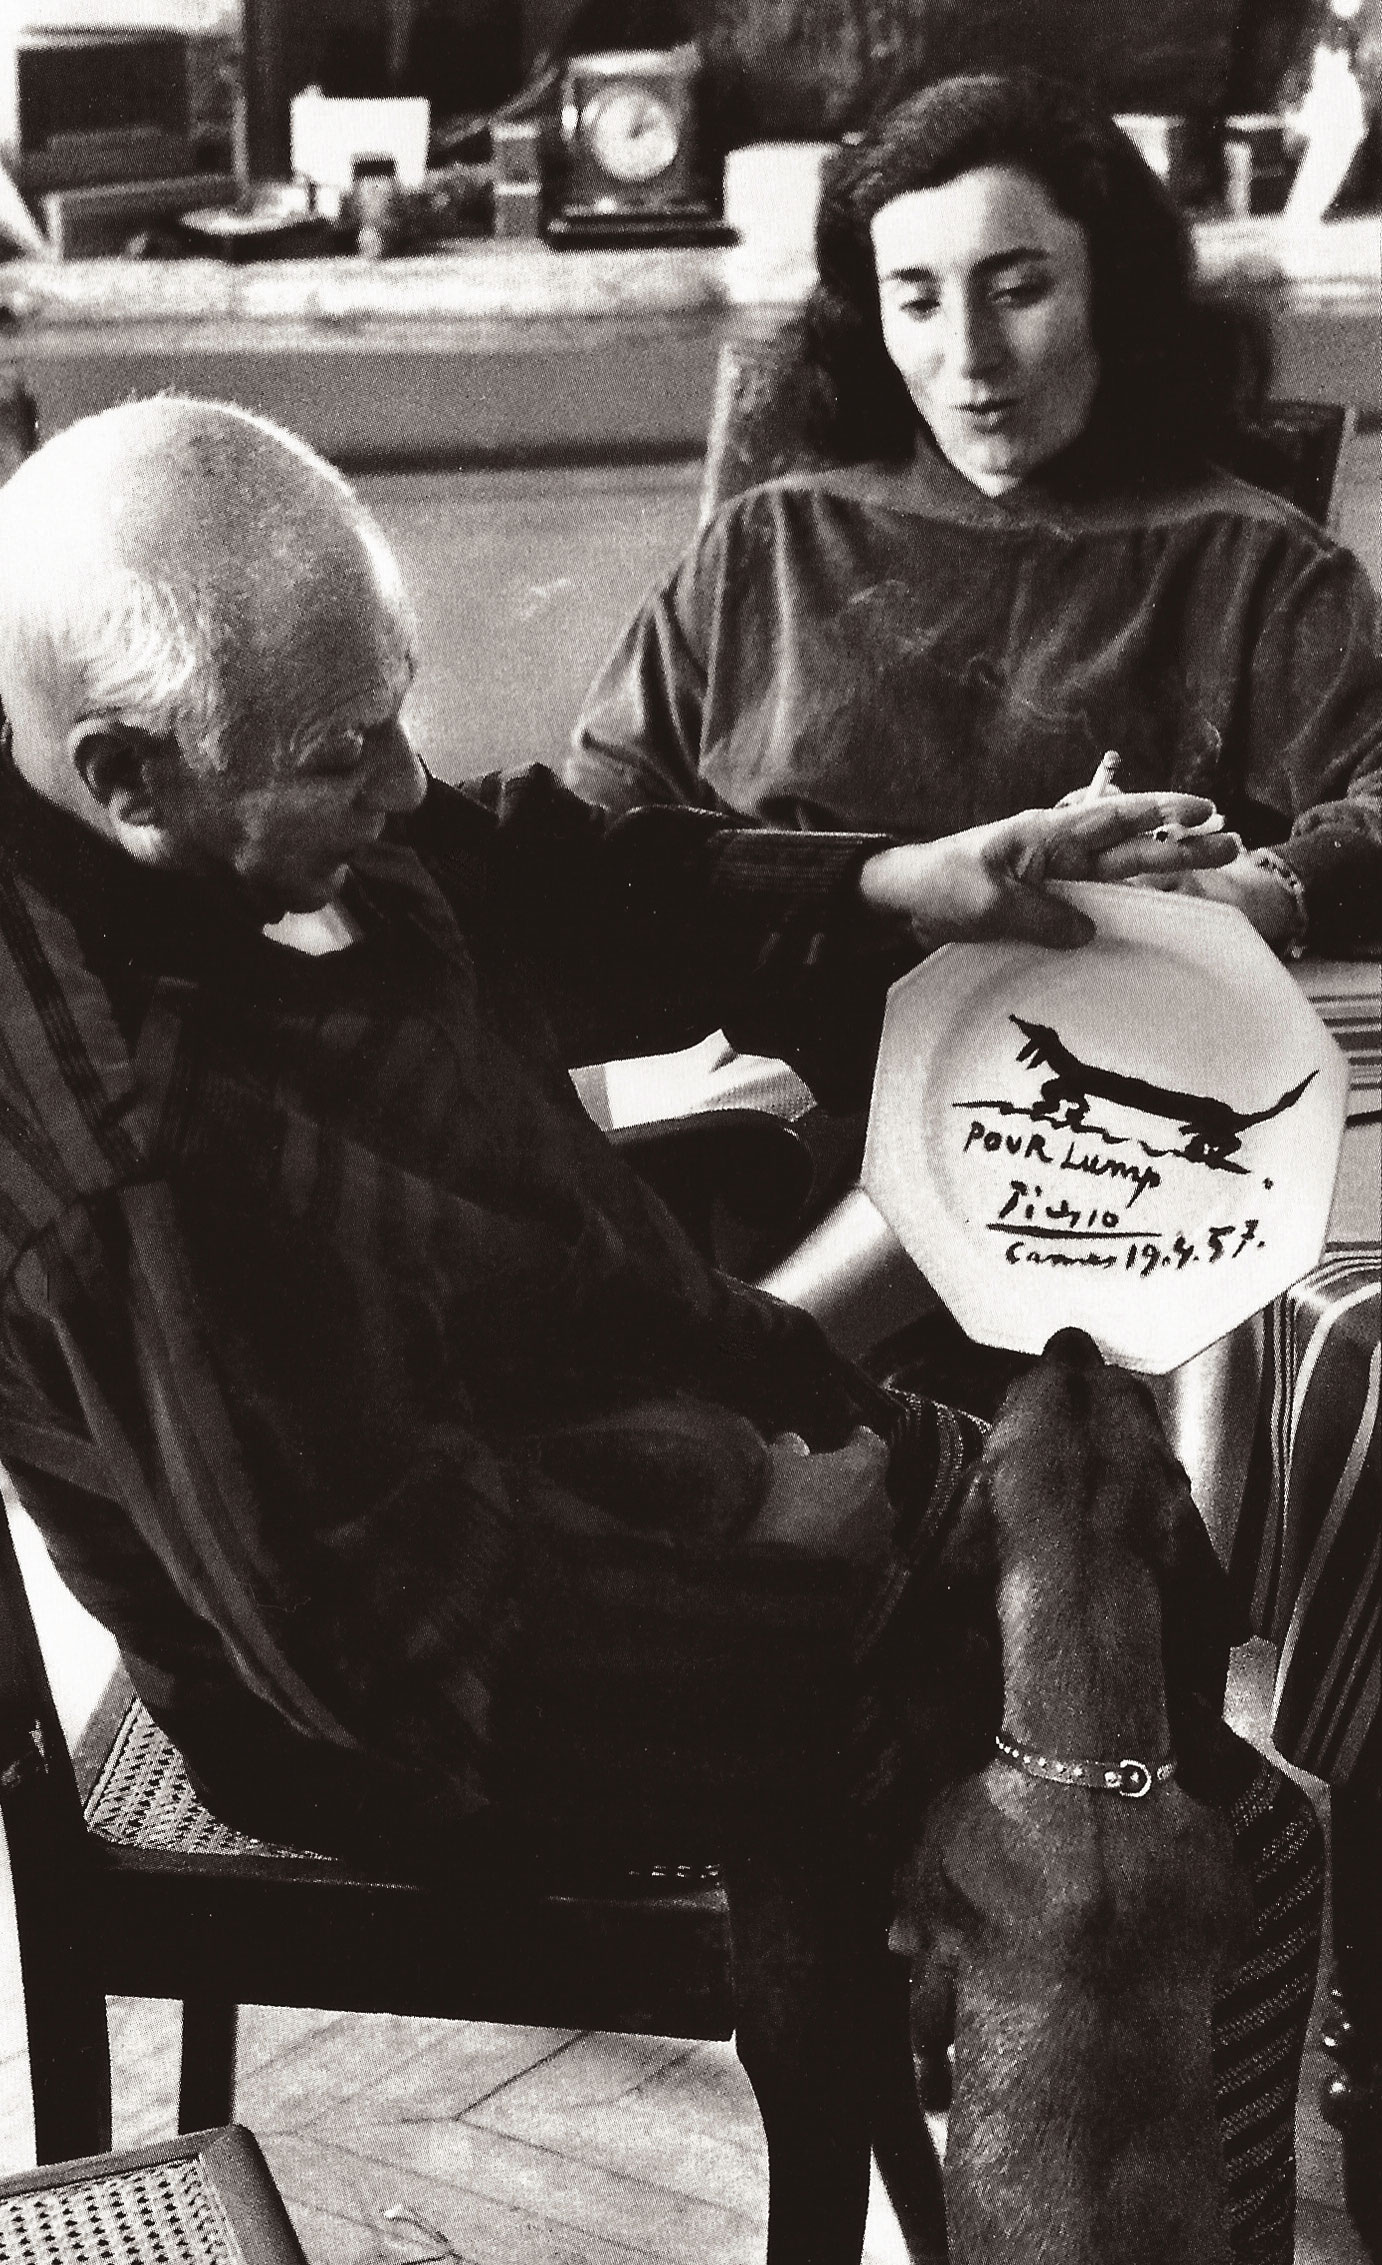 Picasso paints Lump a dinner plate.